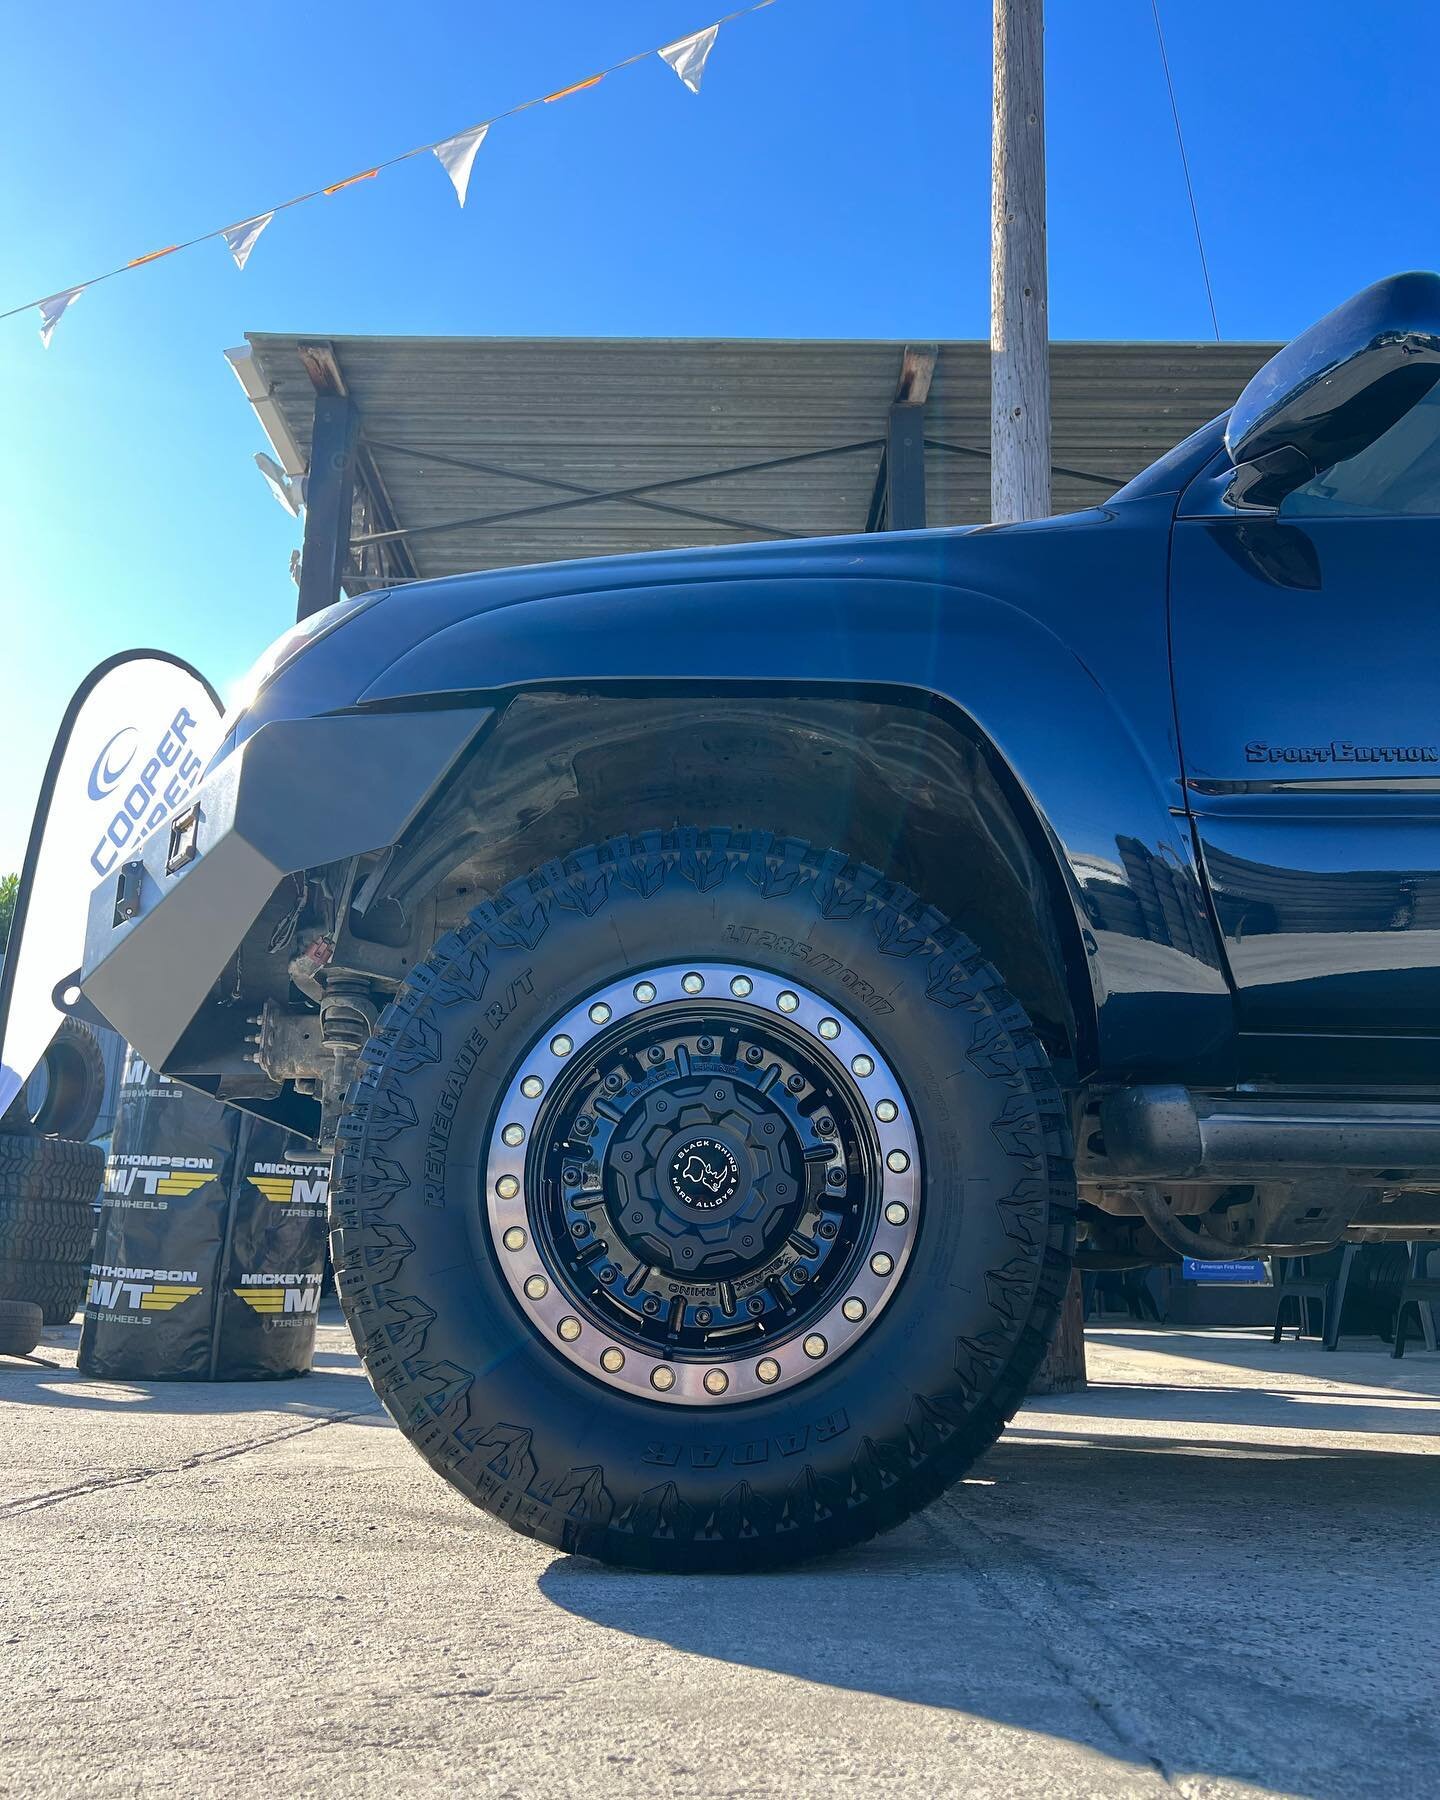 2006 Toyota 4runner on 17&rsquo; Black Rhino Wheels and Radar RT tires
3.5&rsquo; Rough country lift 
#roughcountry #roughcountrysuspension #roughcountrylift #offroad #offroading #offroad4x4 #lifted #liftedtrucks #toyota #toyota4runner #4runner #blac